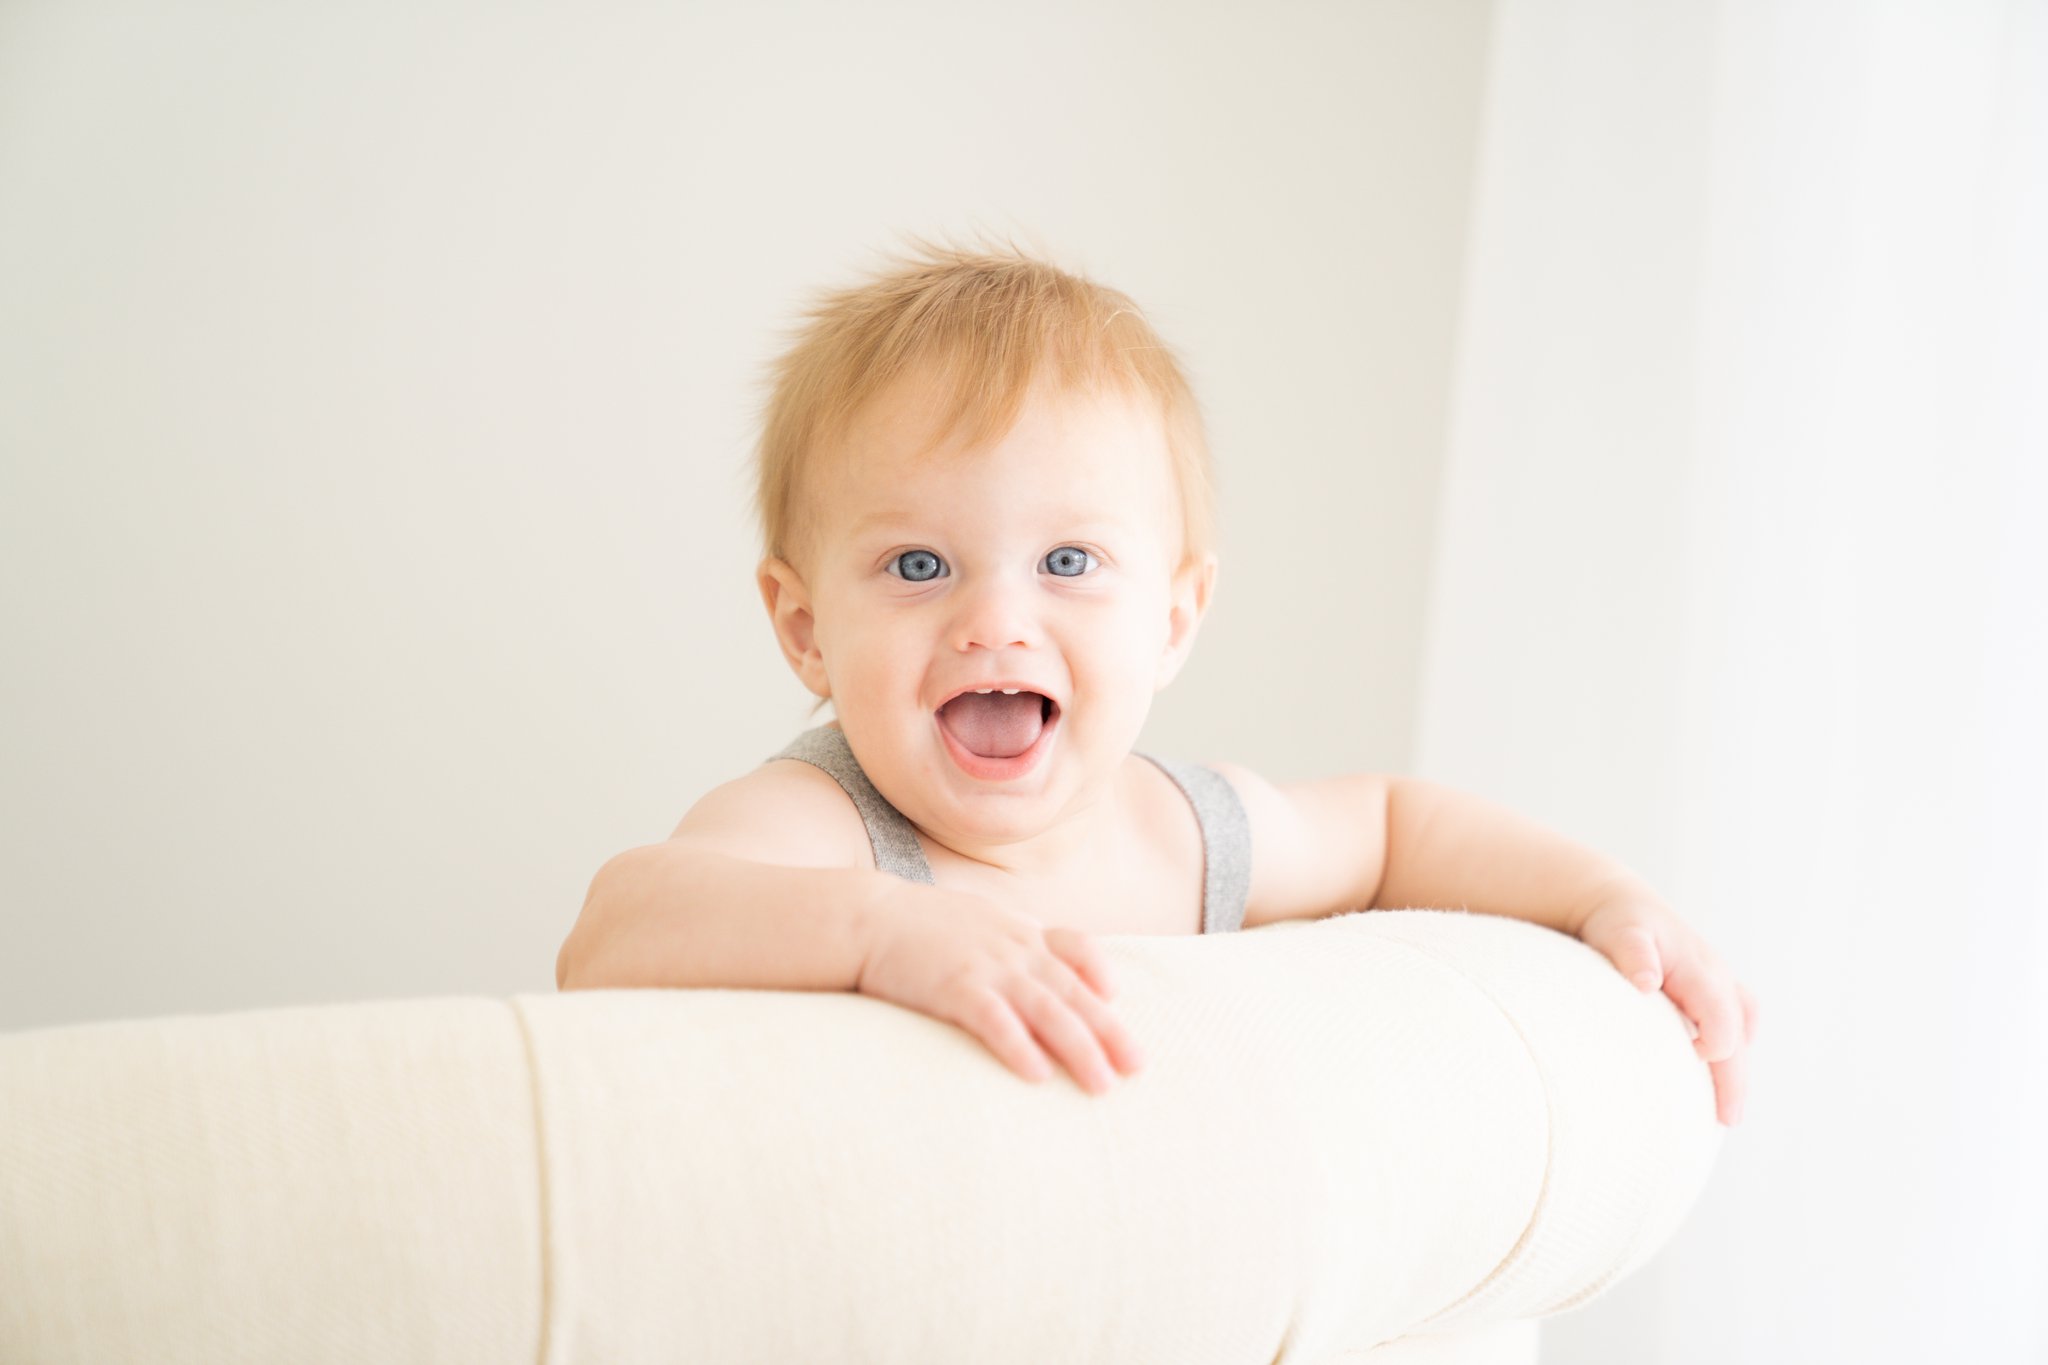 6 month old baby photography session  in Jupiter Fl studio